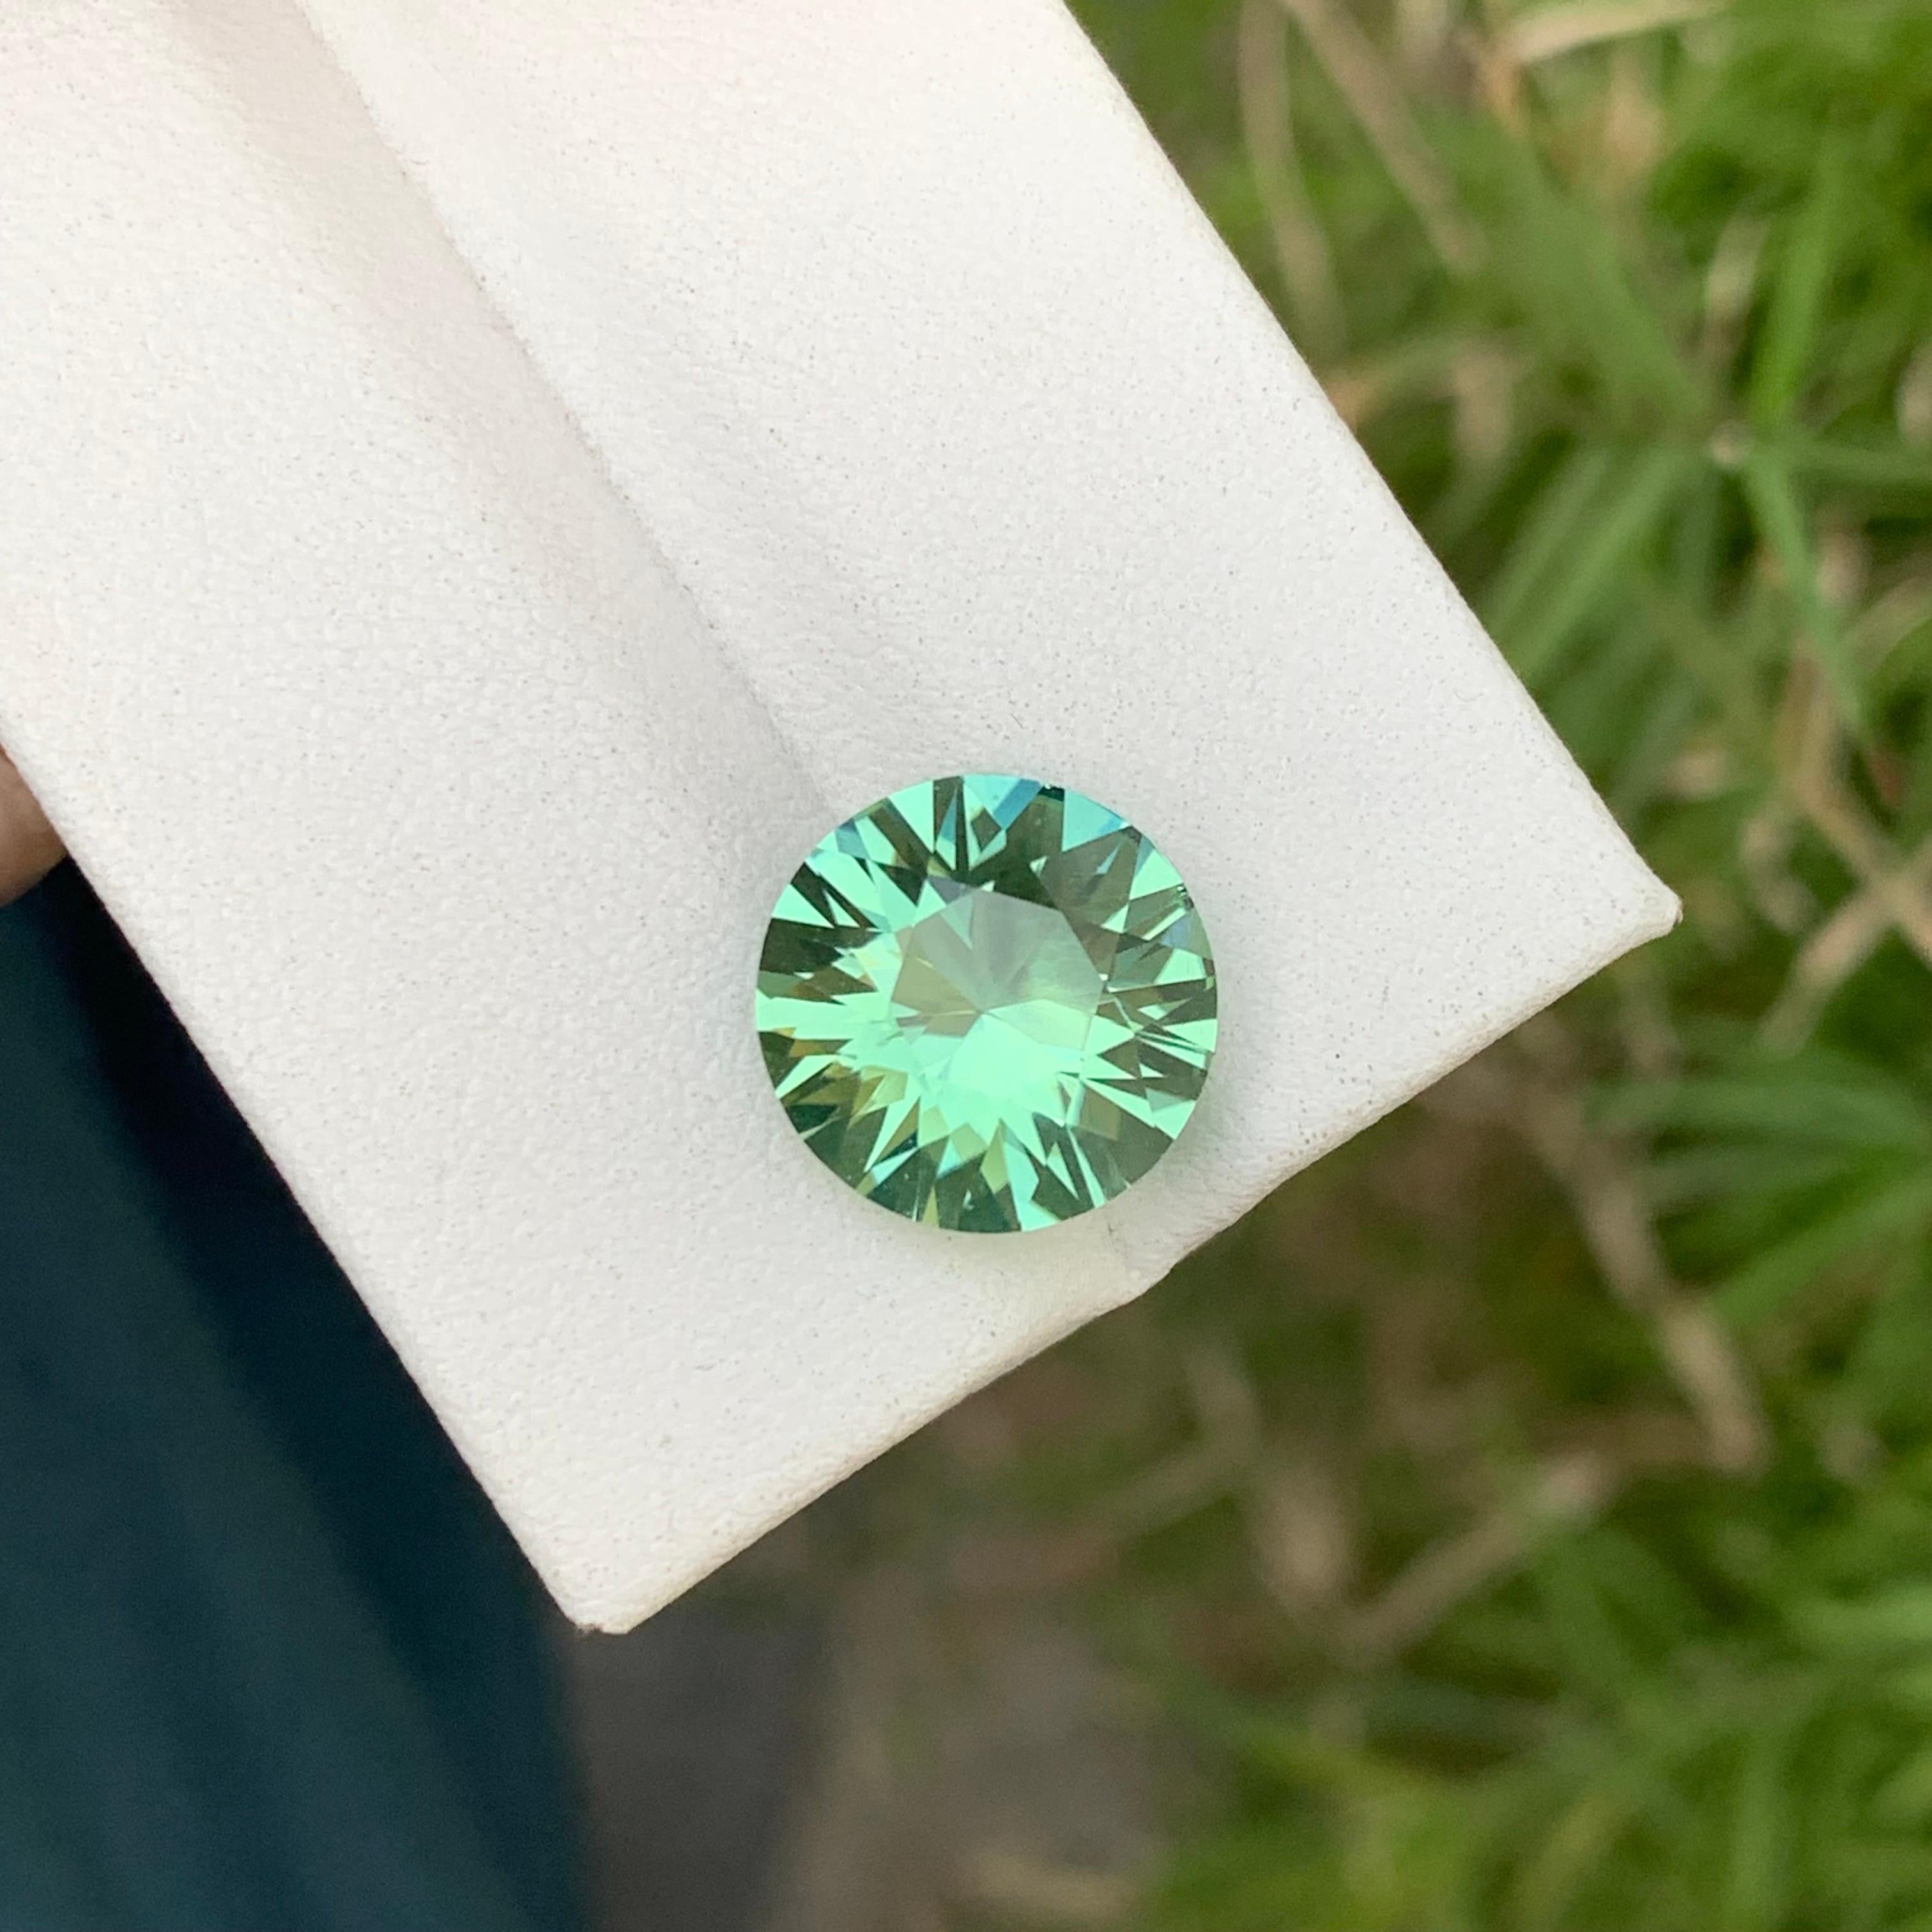 Loose Tourmaline 
Weight: 4.60 Carats 
Dimension: 11.2x11.2x6.7 Mm
Origin: Kunar Afghanistan 
Shape: Round 
Treatment: Non
Color: Mint Green
Certificate: On Customer Demand 
Mint green tourmaline is a captivating variation of tourmaline, celebrated